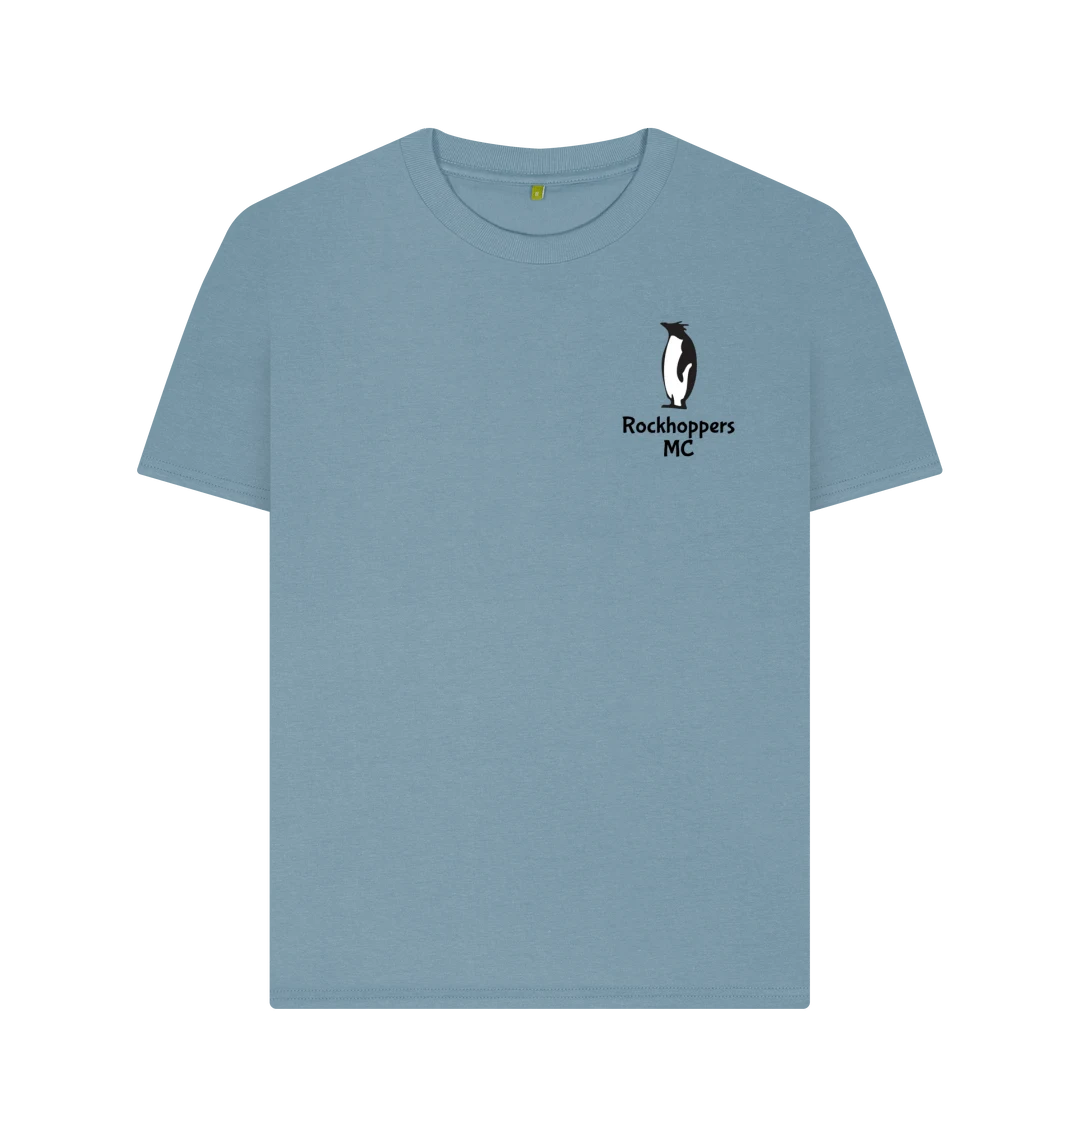 Grey-blue Rockhoppers T-shirt with logo and name on front